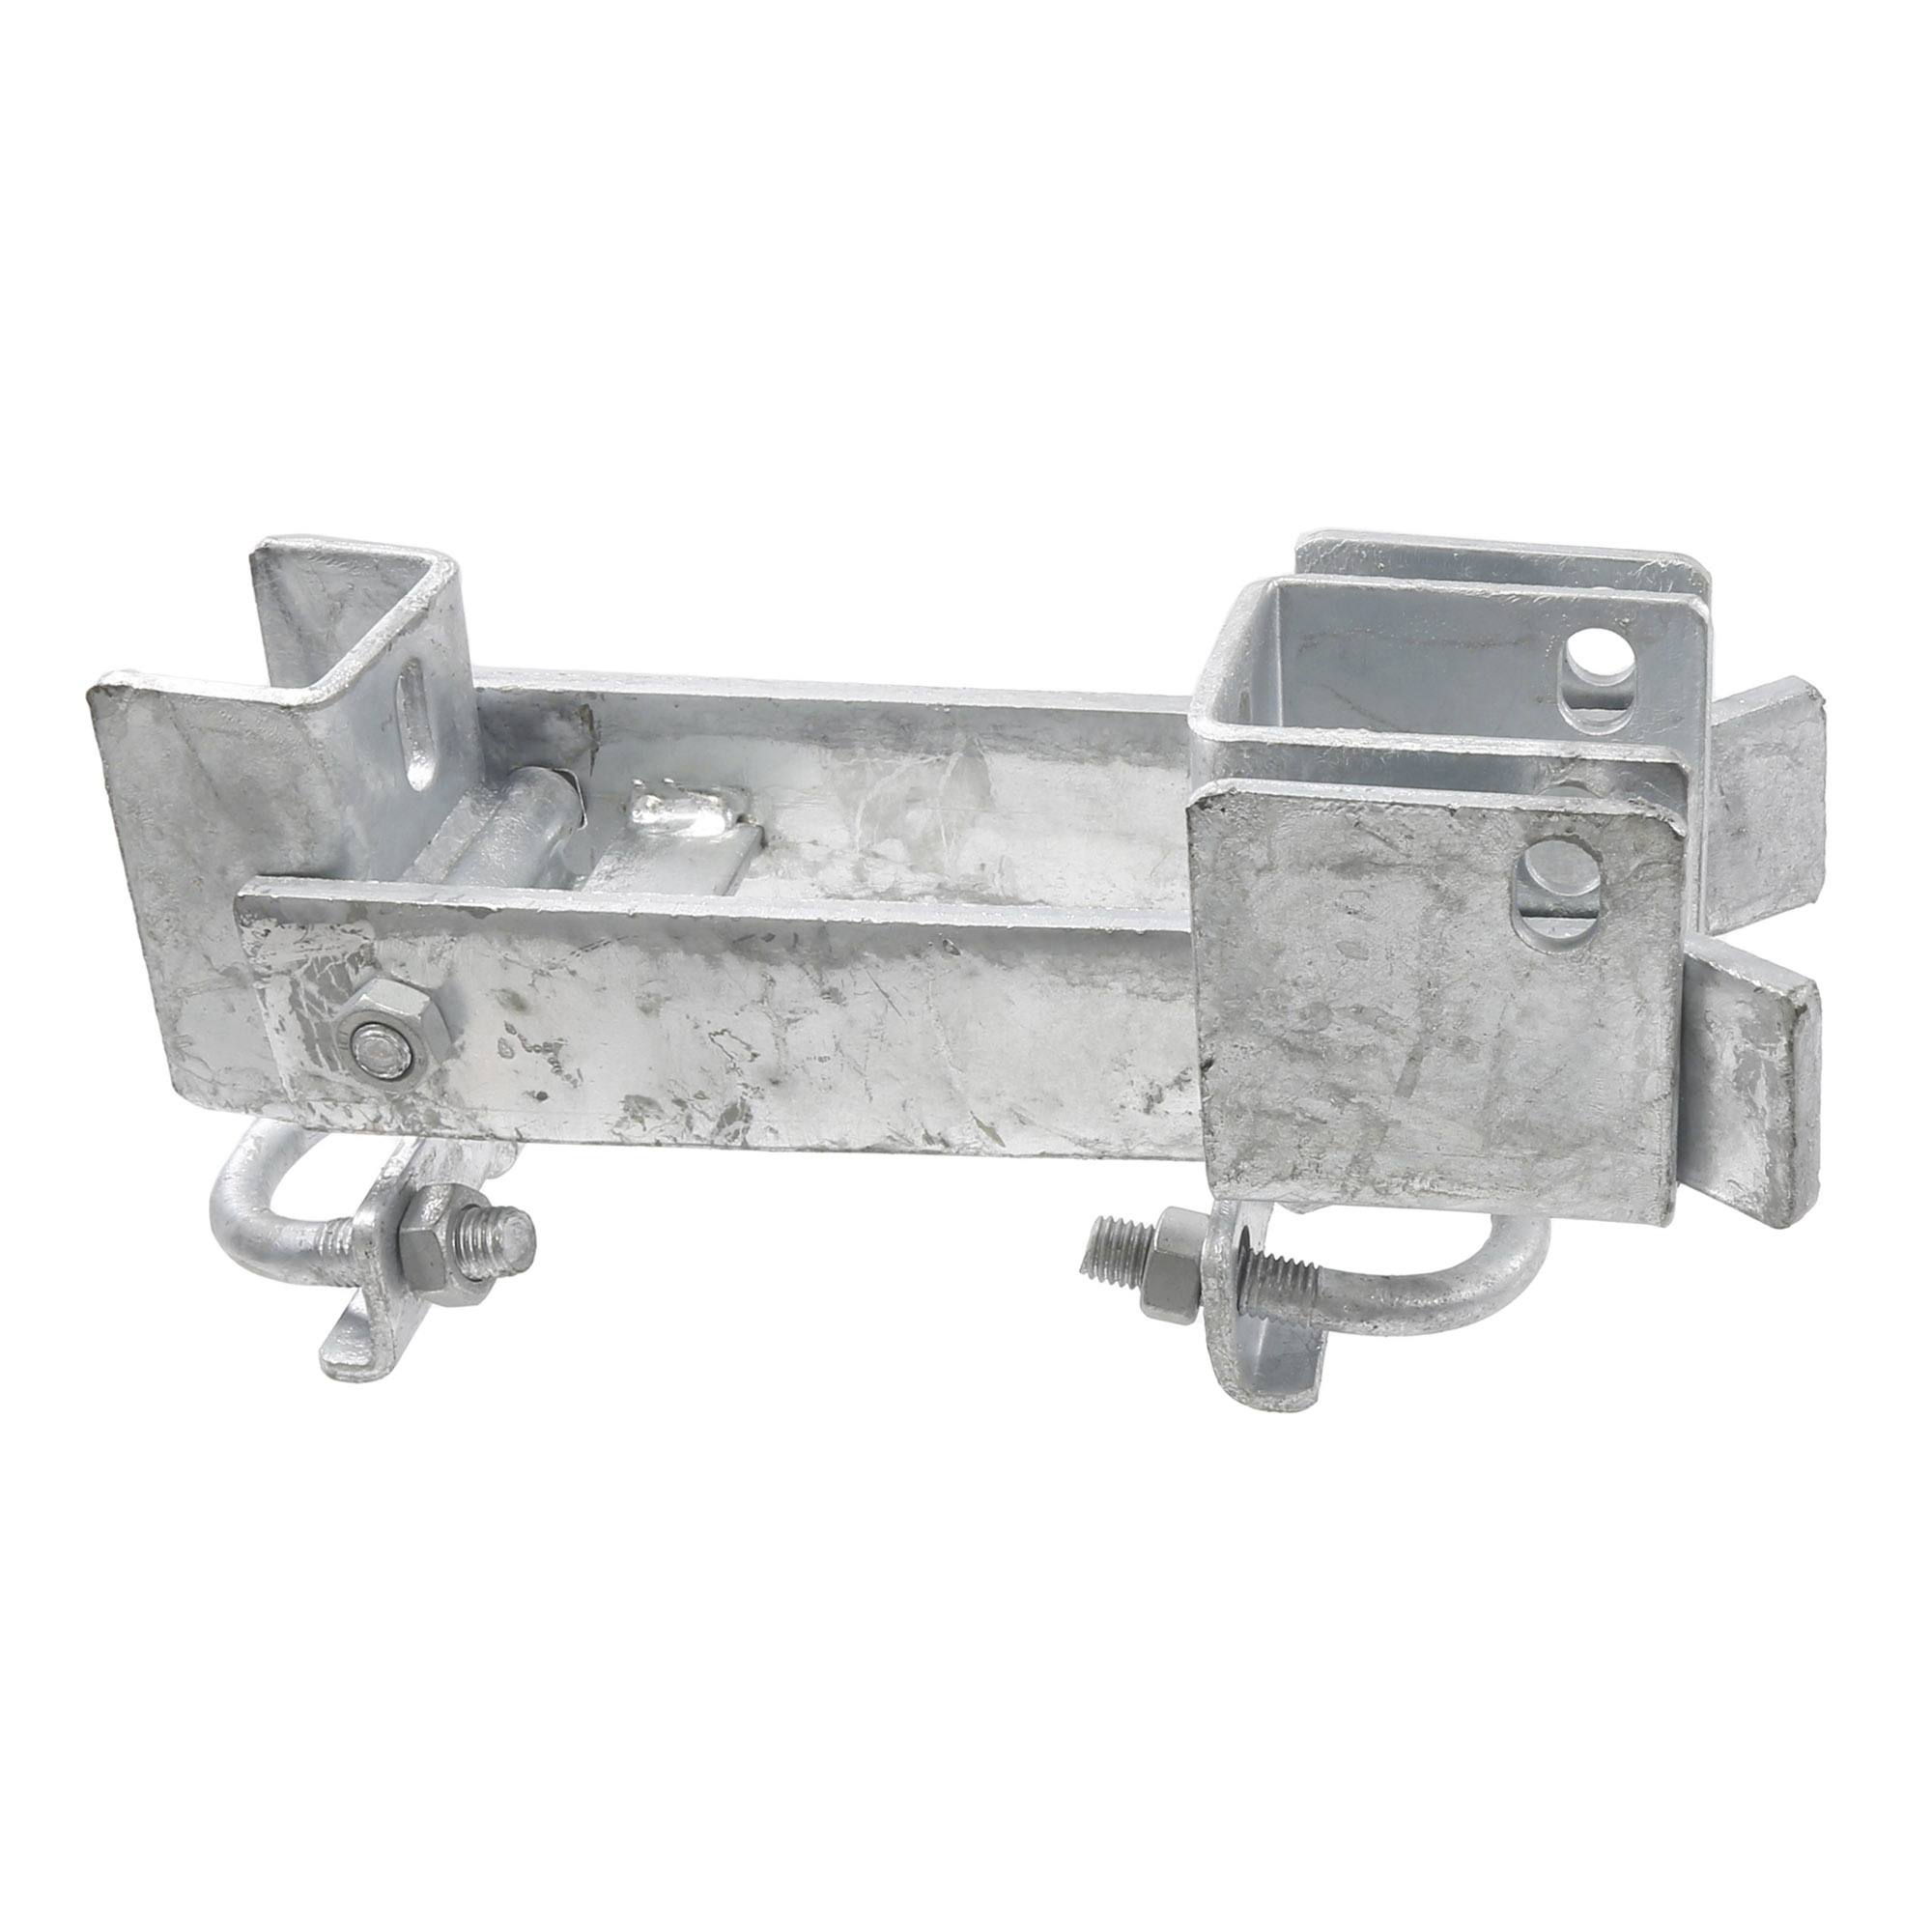 Chain Link Gate Latches